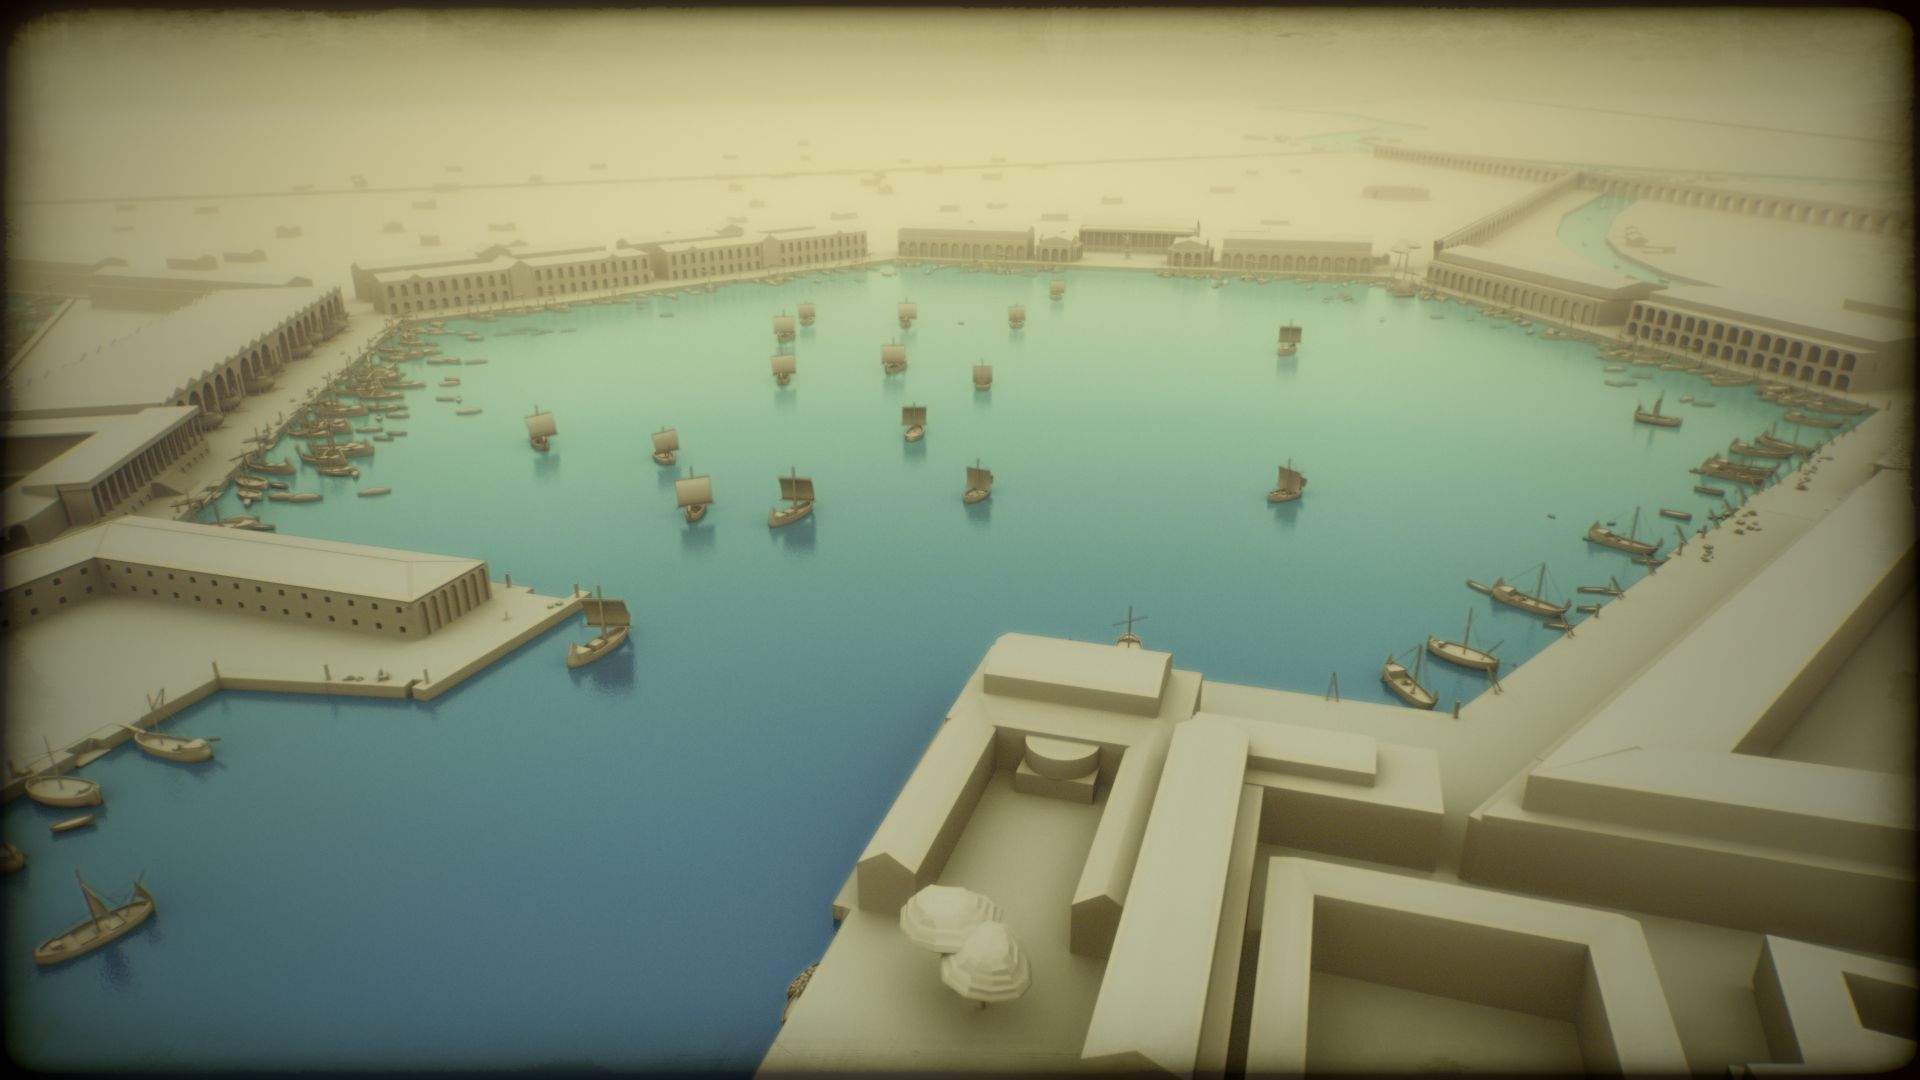 A 3D interpretation of the harbour in its routine operations